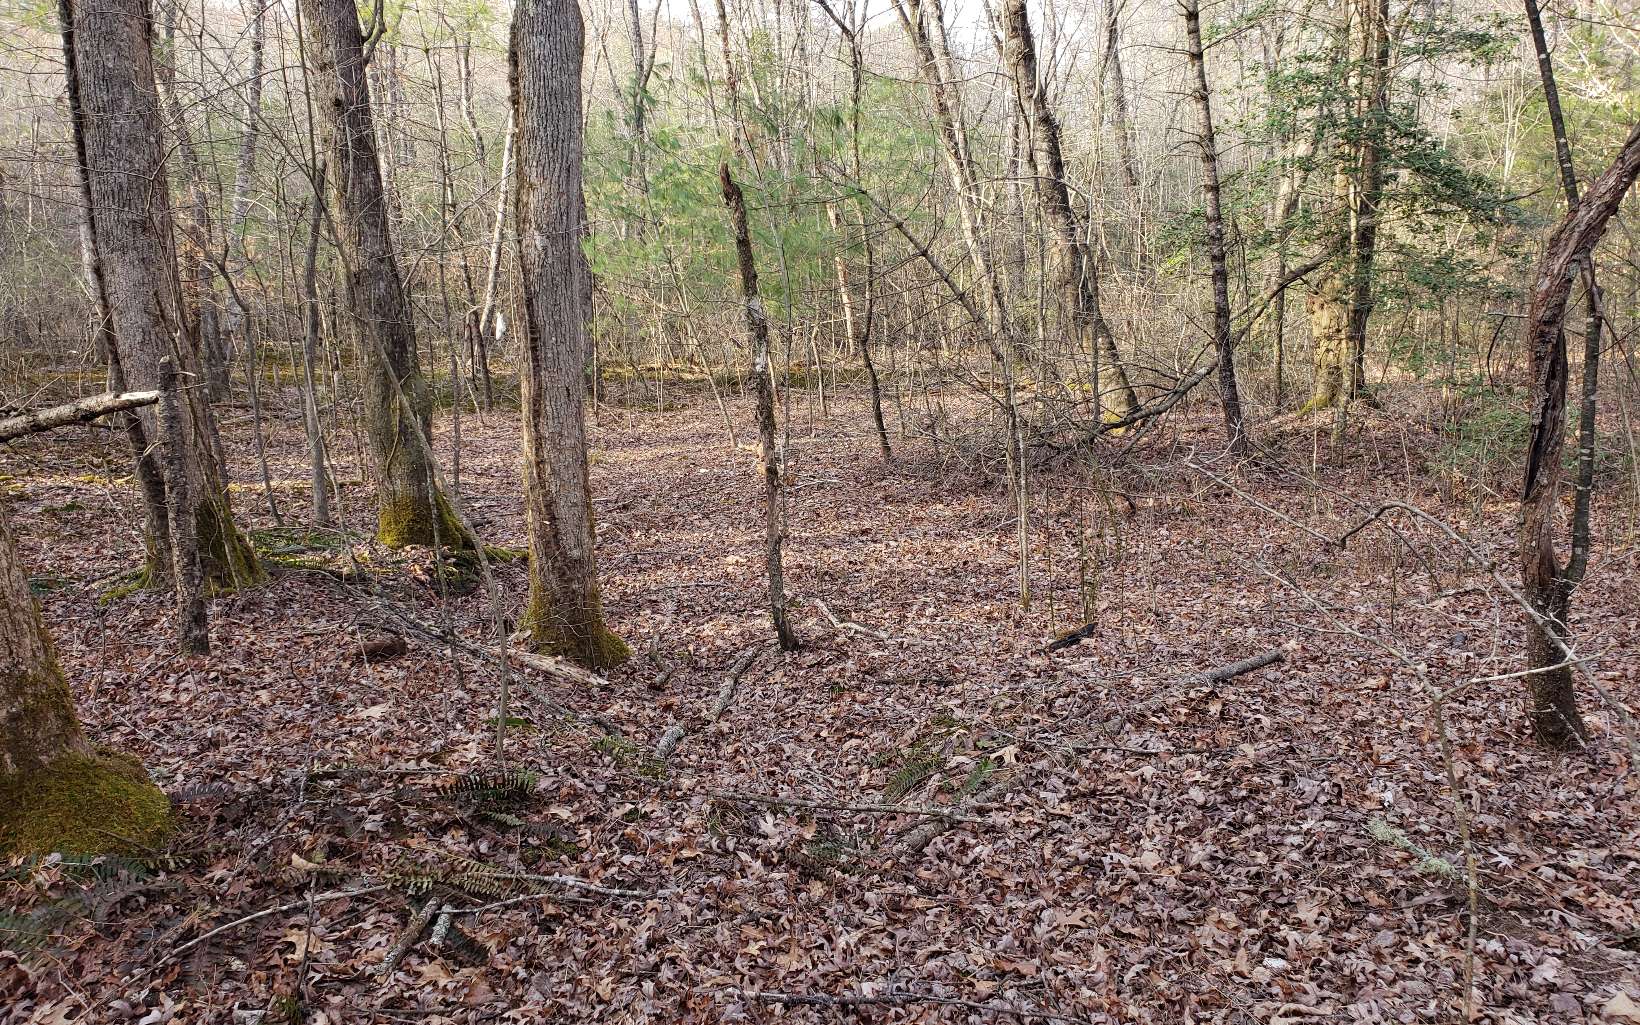 4.7 acres. Wooded and level. Minimal Deeded Restrictions No Mobile Homes and homes need to be a minimum of 600 sq ft. Very private area. Mill Creek is a county Rd until last home. Then it becomes private Rd prior to this property.